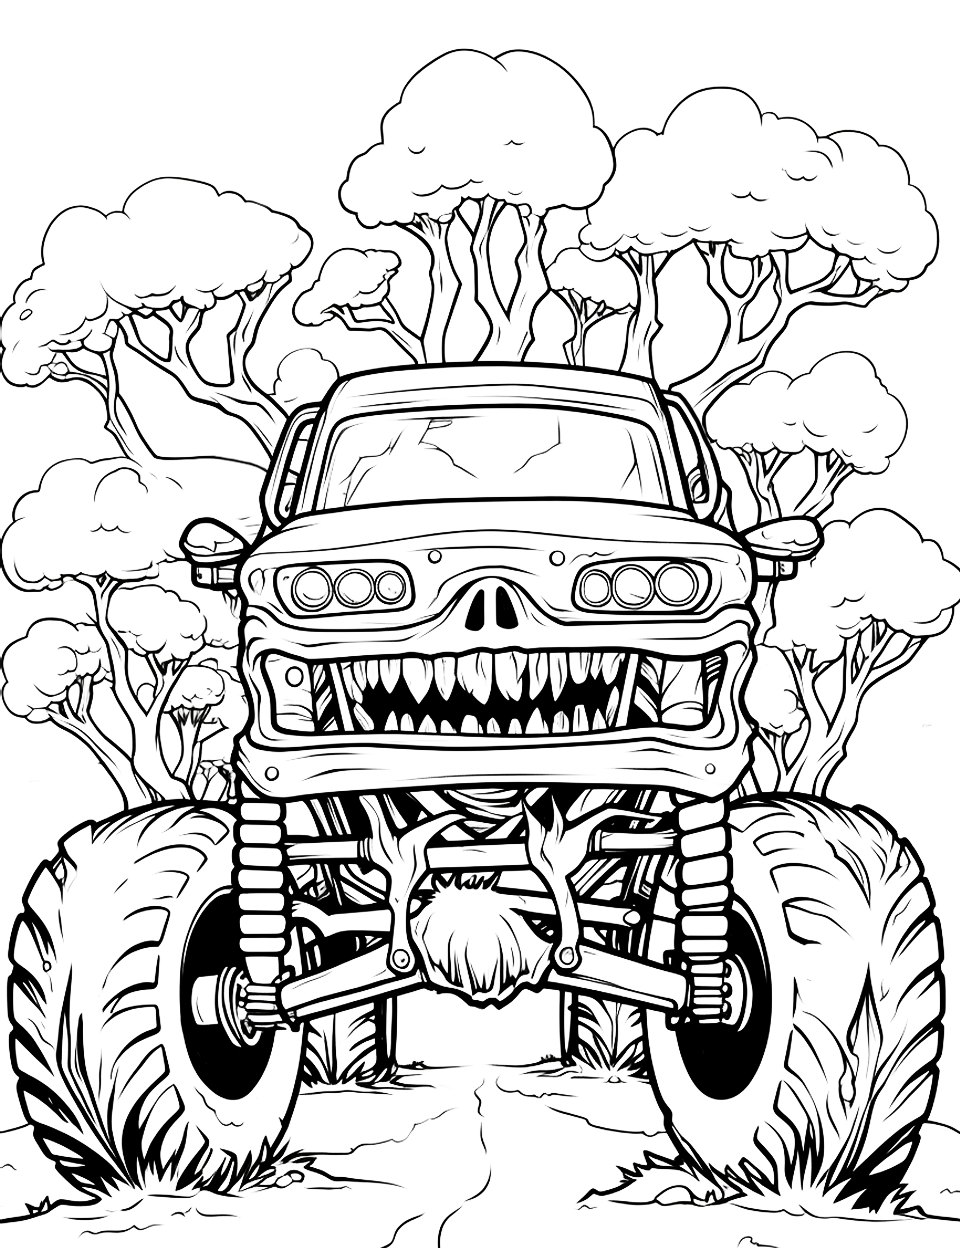 Zombie Style Monster Truck Coloring Page - A monster truck designed like a zombie.